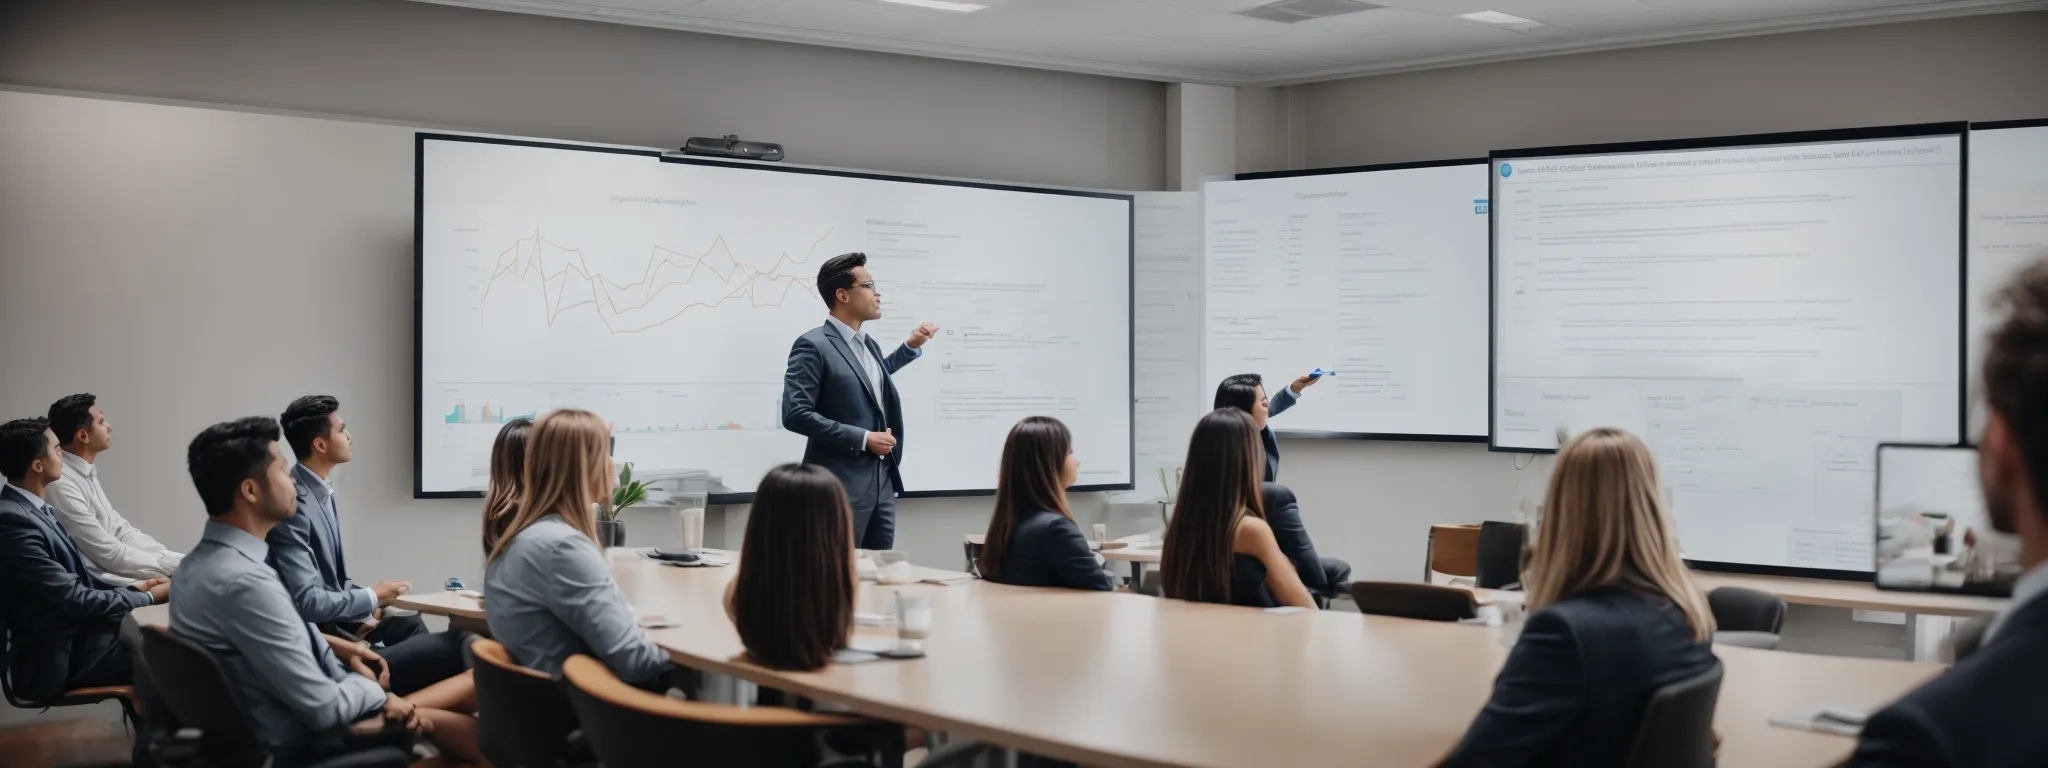 a marketing expert presents seo strategies on a whiteboard to attentive business owners in a bright conference room.